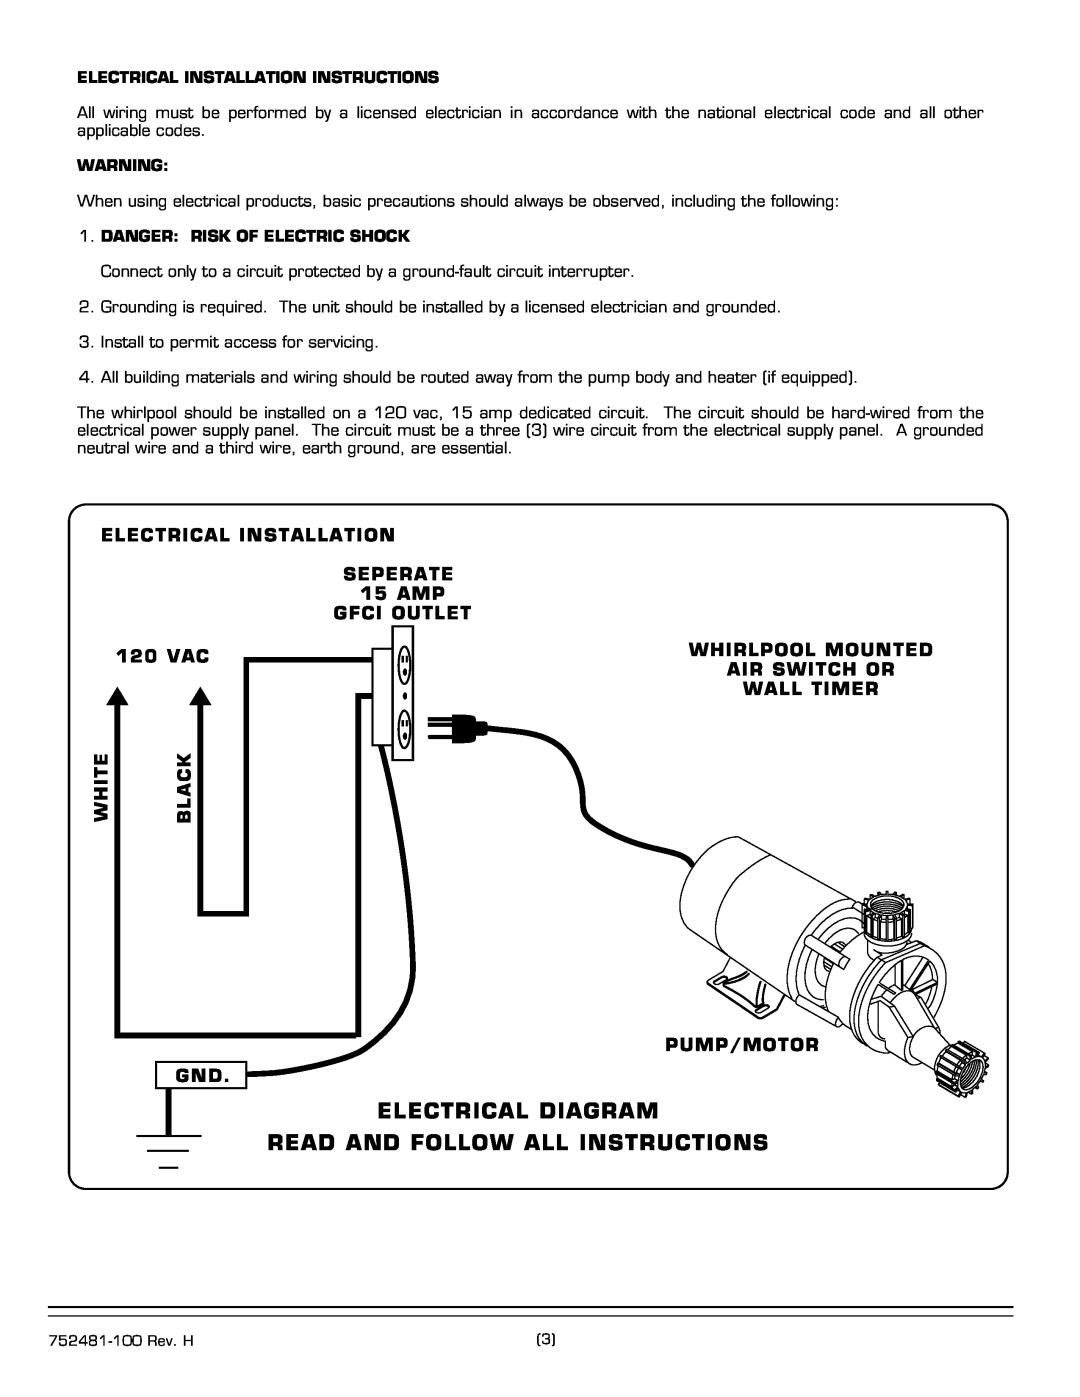 American Standard 2770.XXXW Series Electrical Diagram, Read And Follow All Instructions, Gfci Outlet, 120 VAC, White 